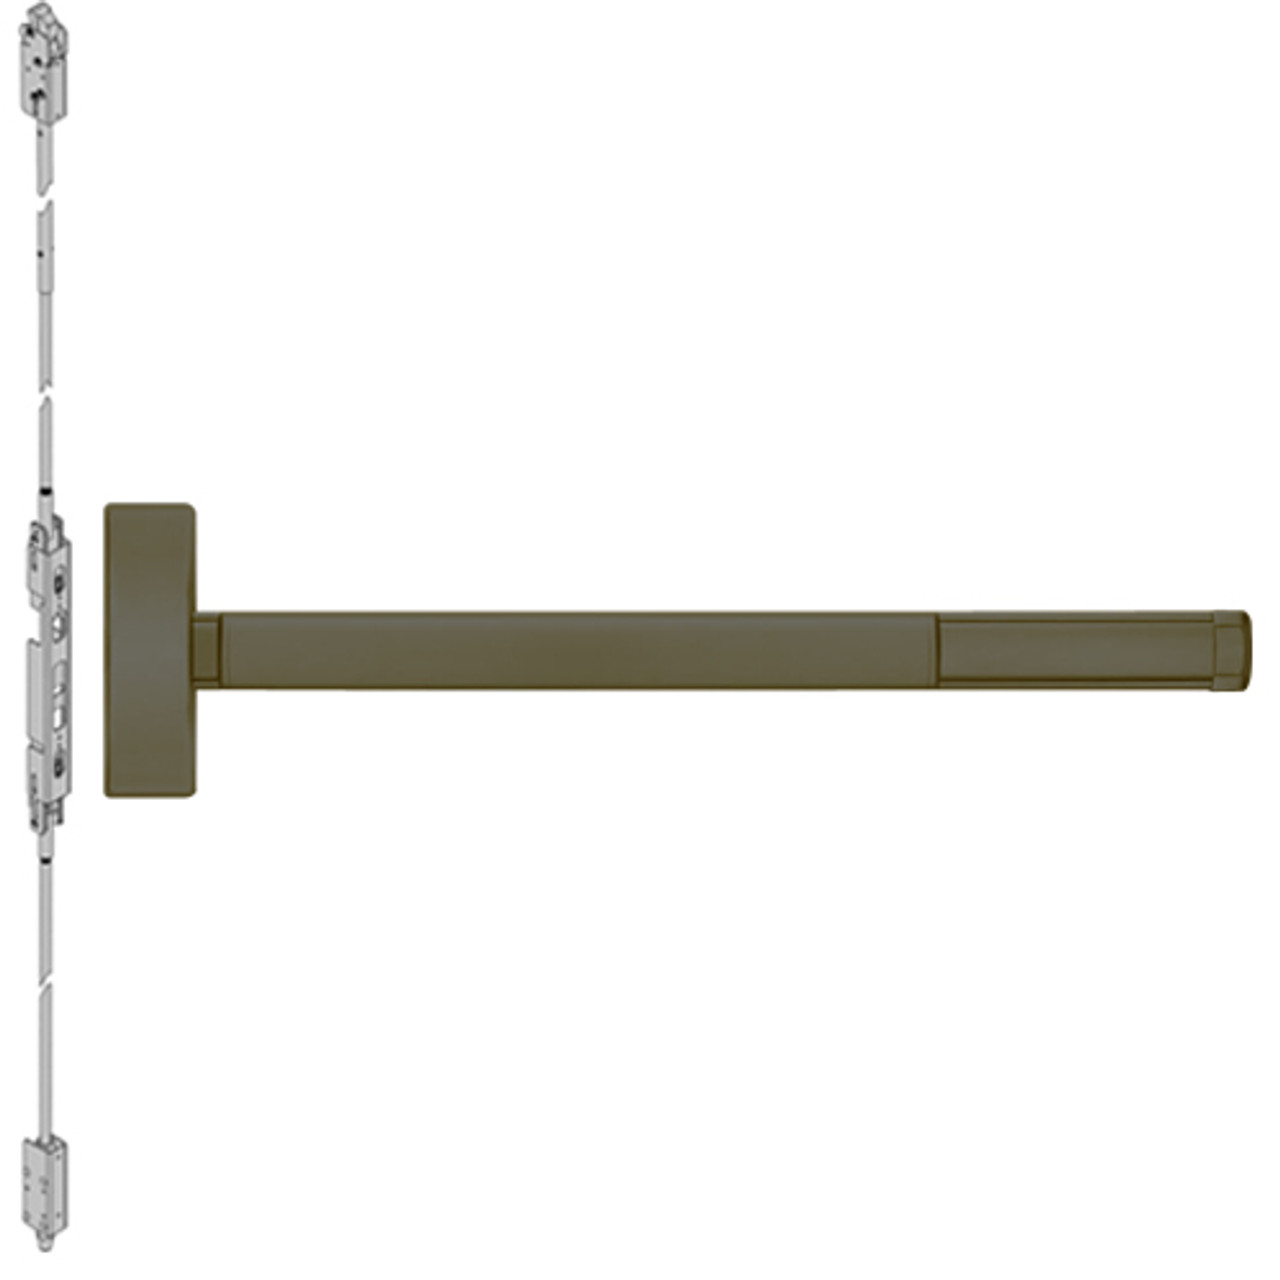 ELRFL2801LBR-613-48 PHI 2800 Series Fire Rated Concealed Vertical Rod Exit Device with Electric Latch Retraction Prepped for Cover Plate in Oil Rubbed Bronze Finish